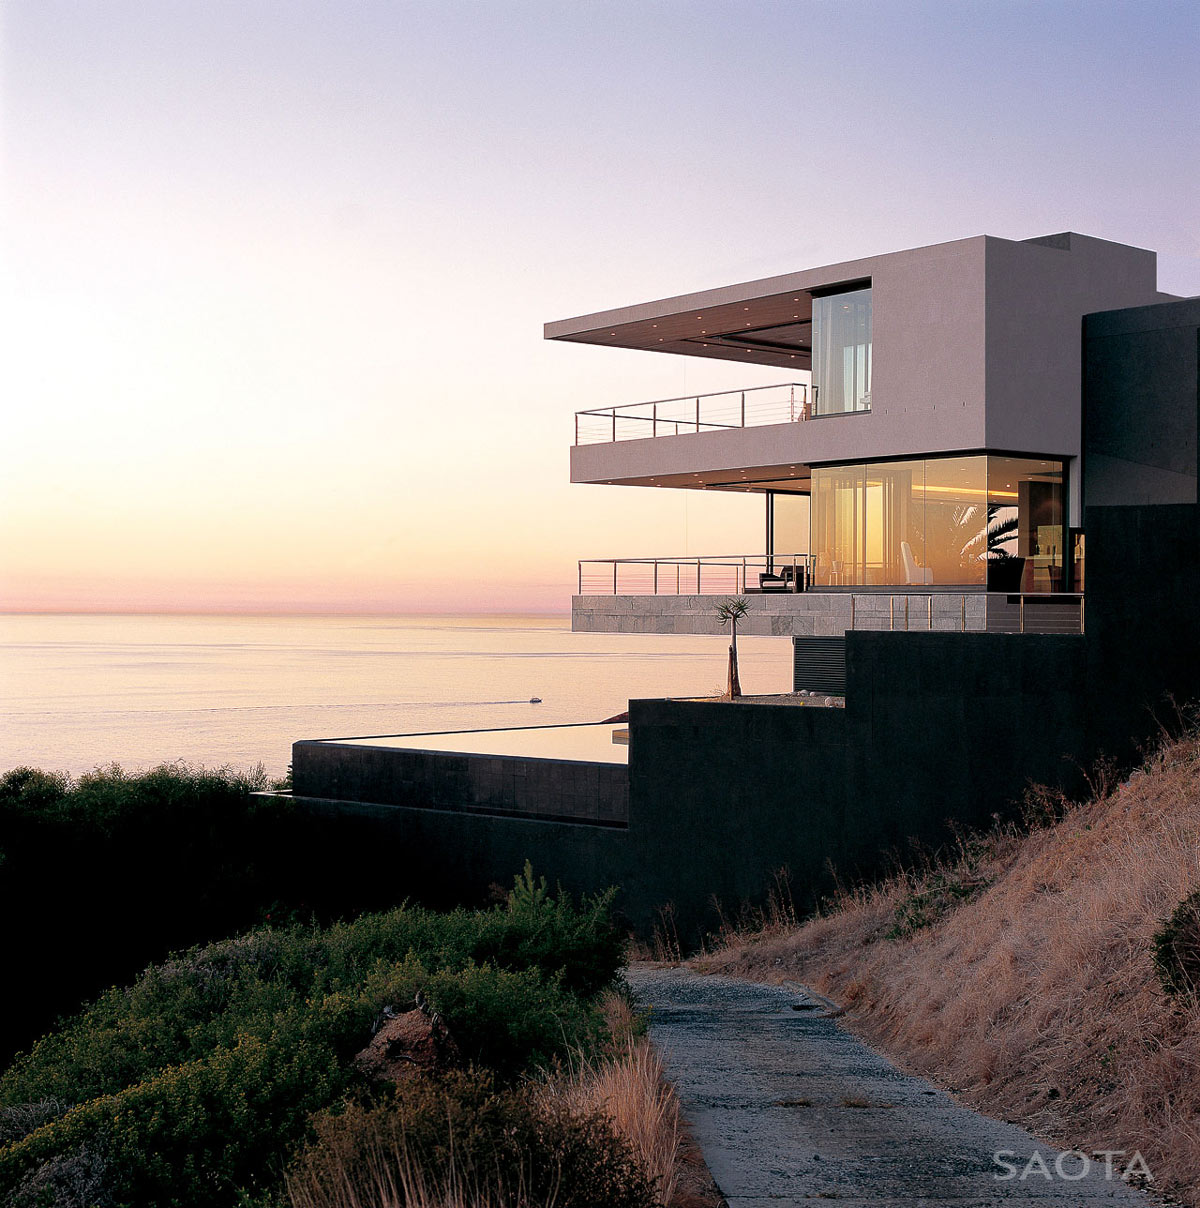 Balcony, Ocean Views, St Leon 10 in Cape Town, South Africa by SAOTA and Antoni Associates